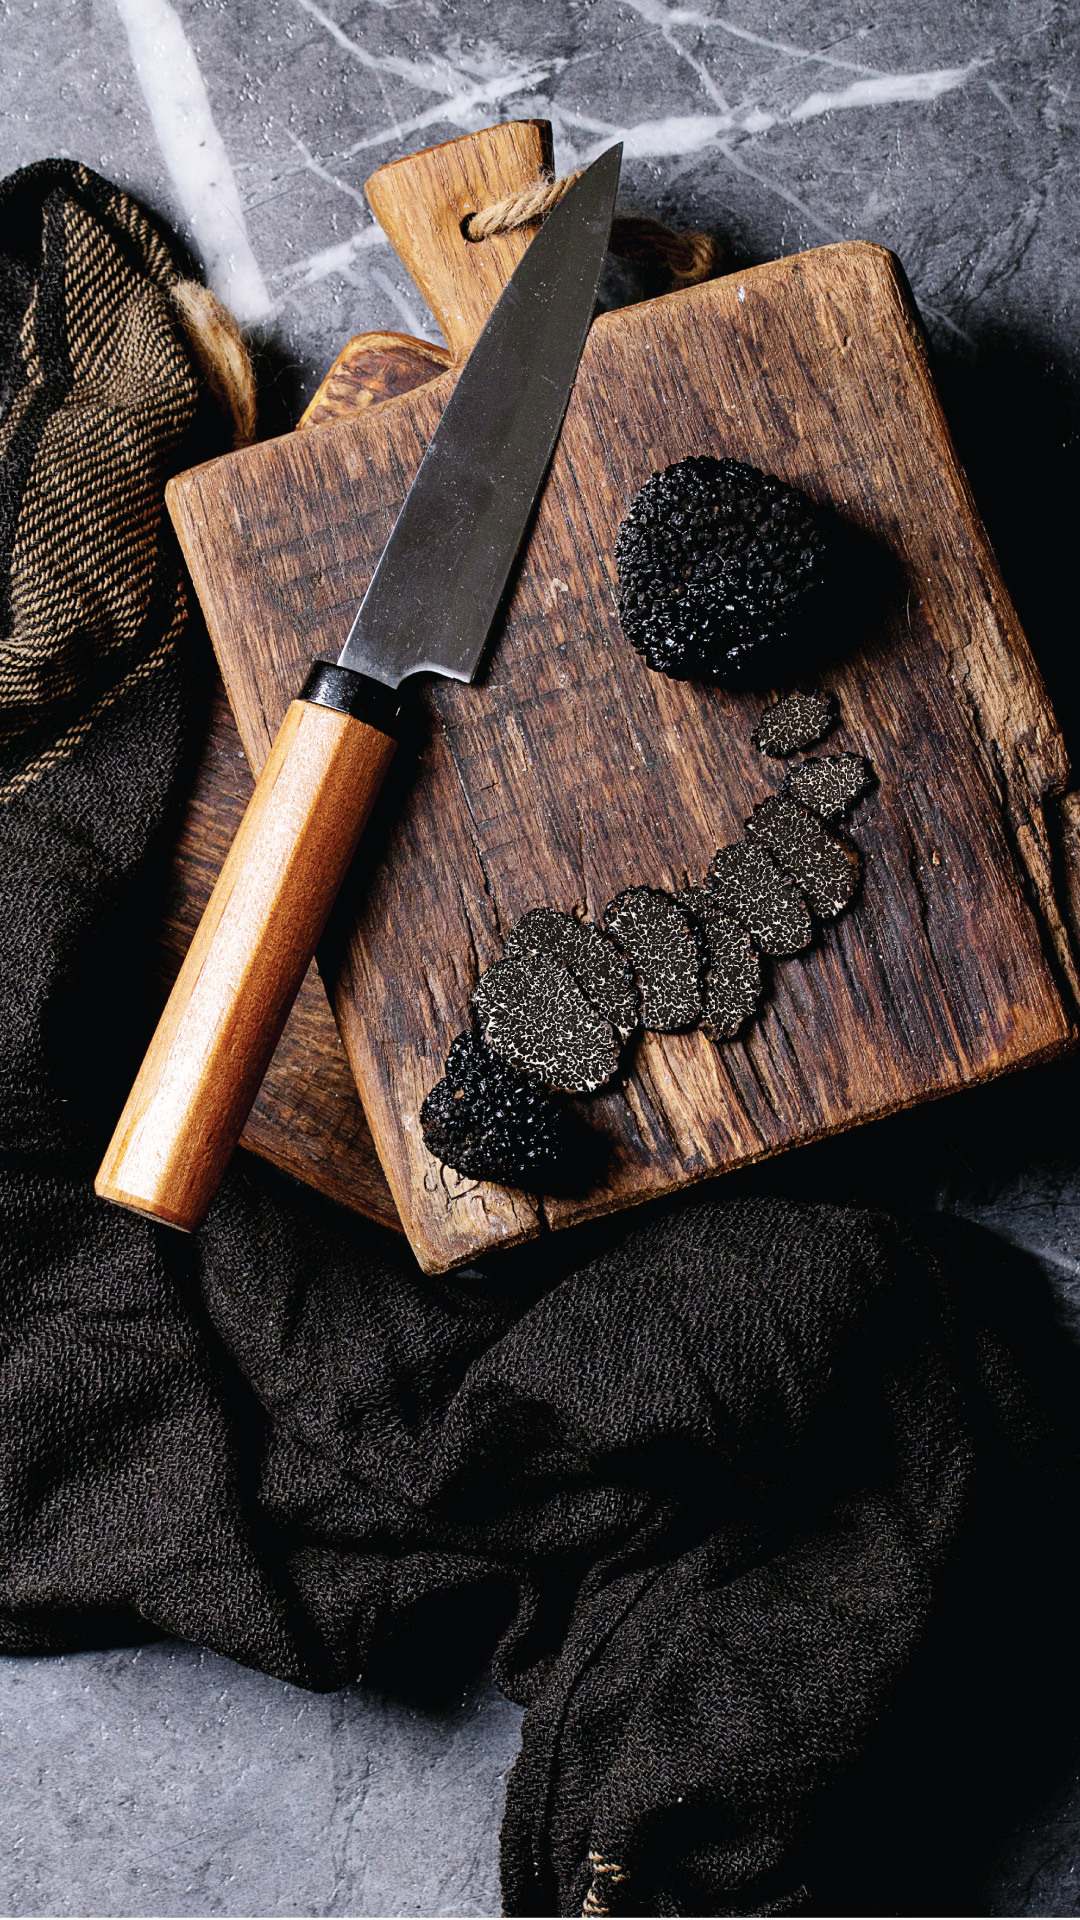 Are You Ready for Some Truffle-icious Fun at Home? Order Your Truffle Box Now!